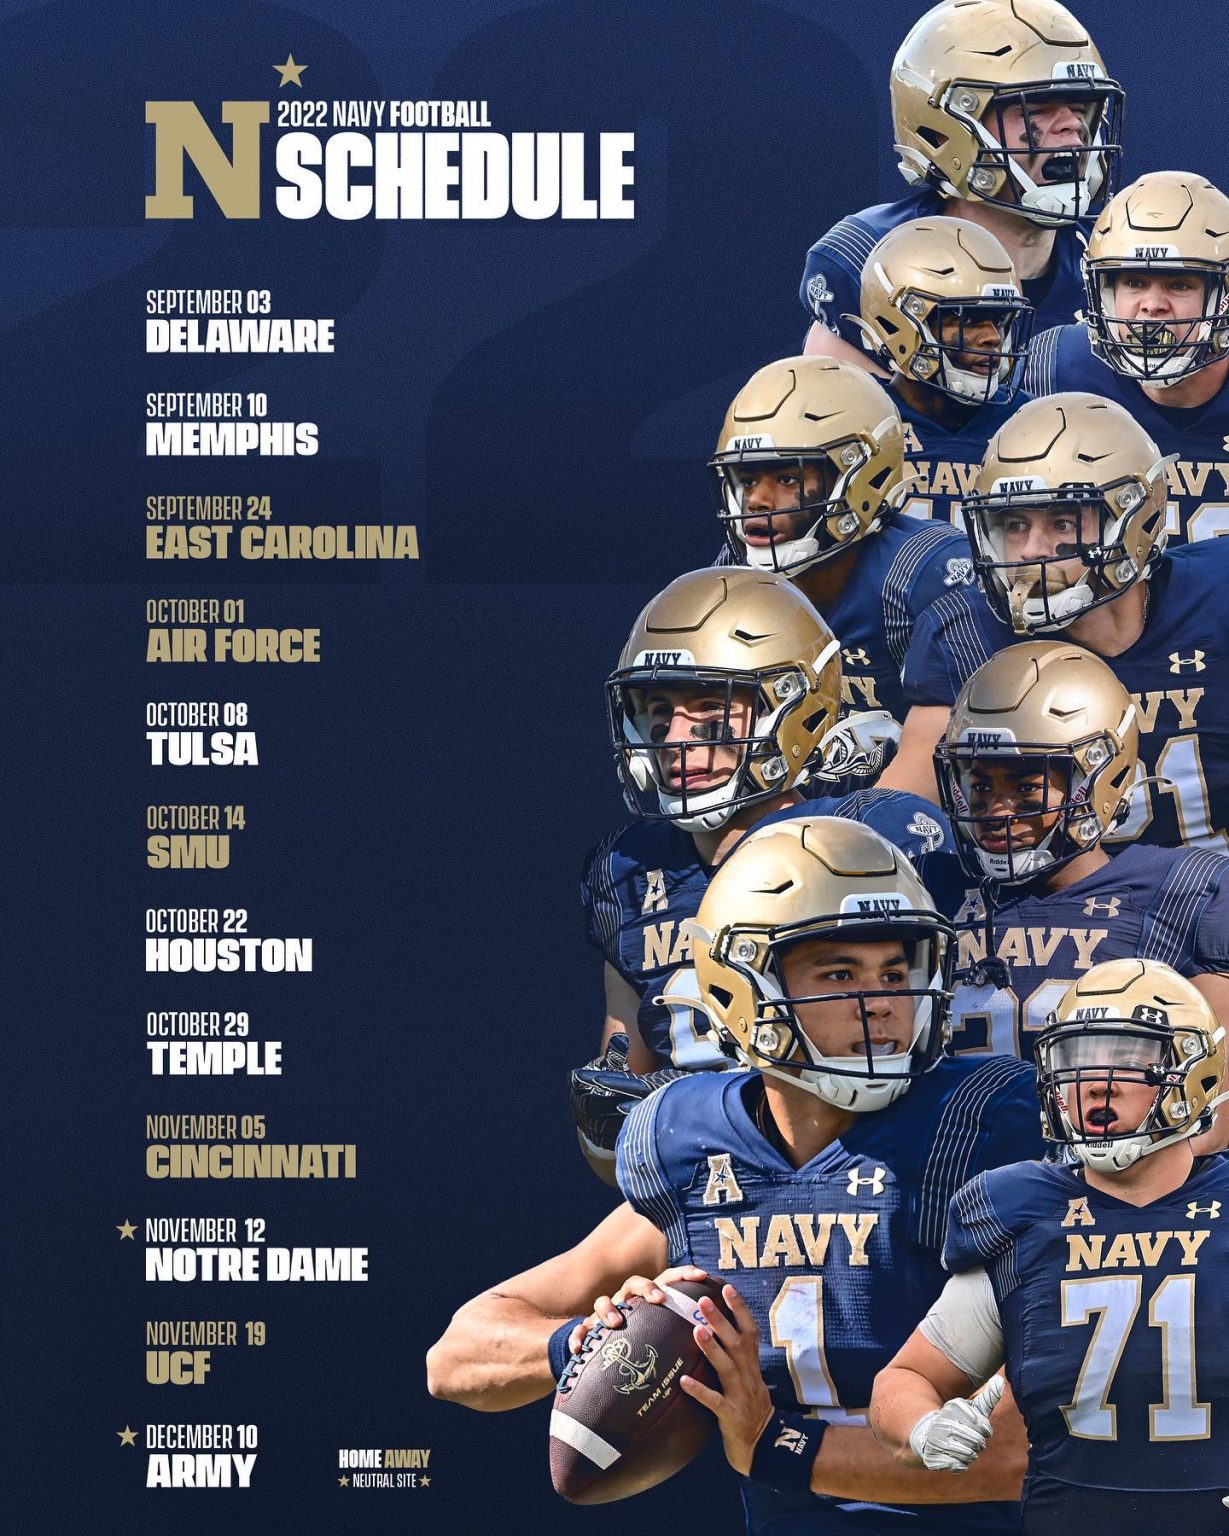 The 2022 Navy Football schedule is here USNA 1978